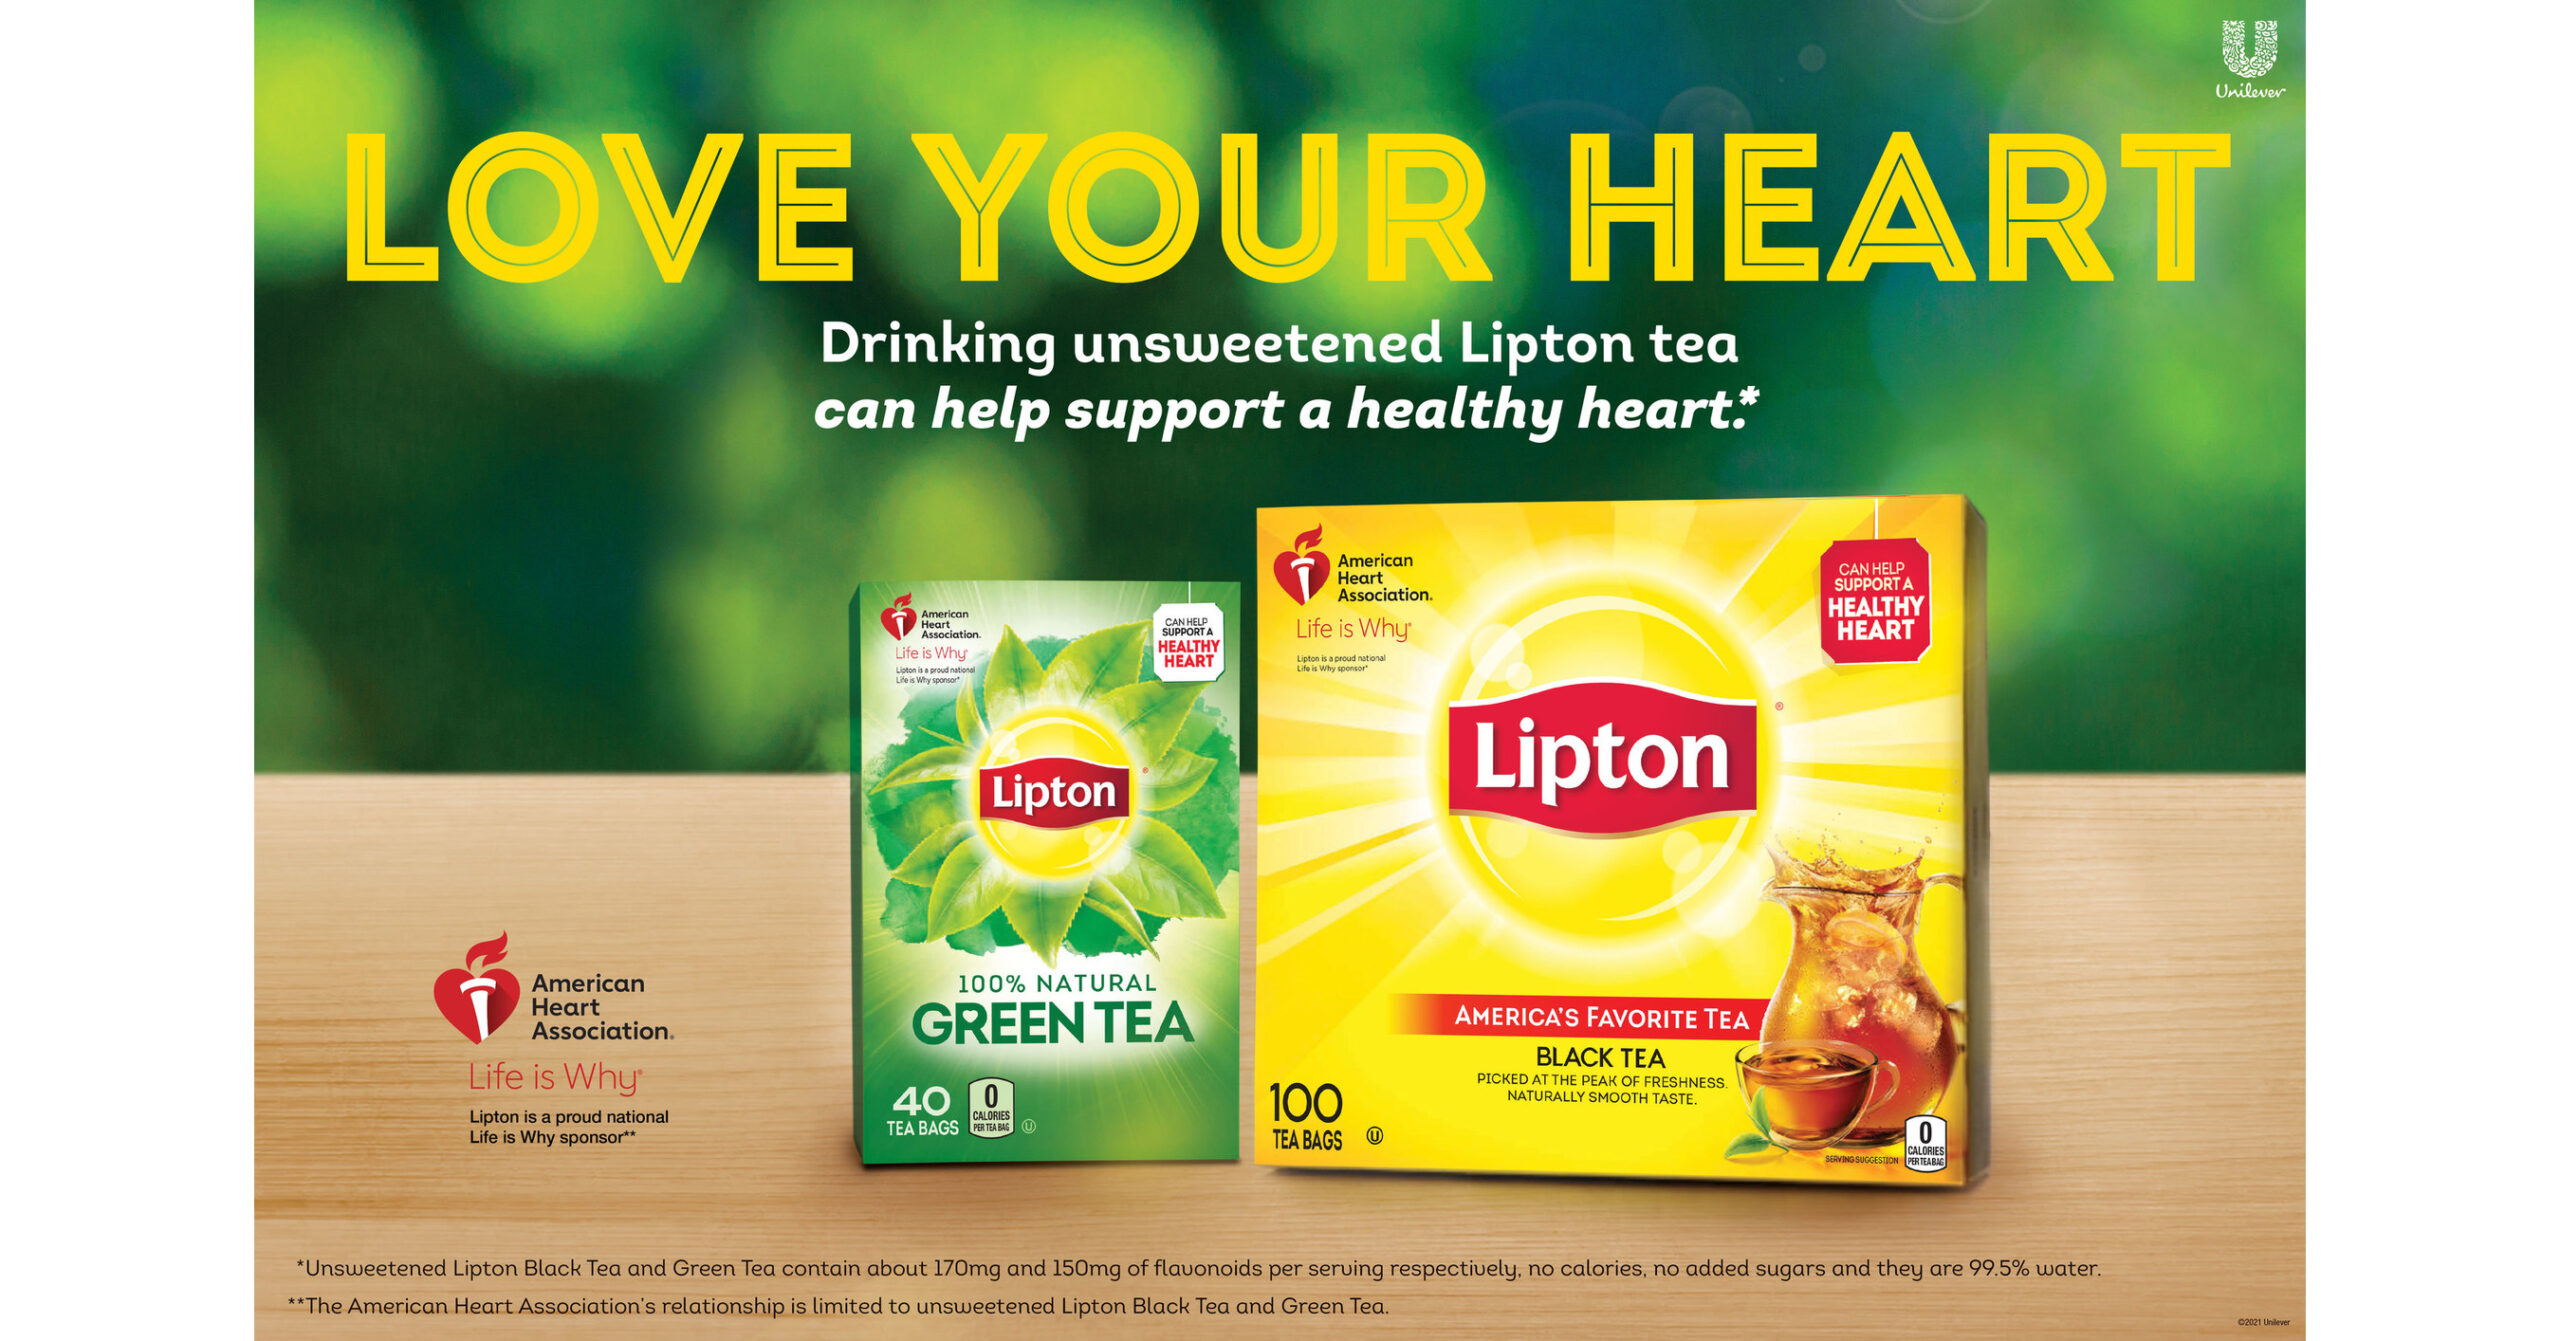 Is Lipton Diet Green Tea Good for You